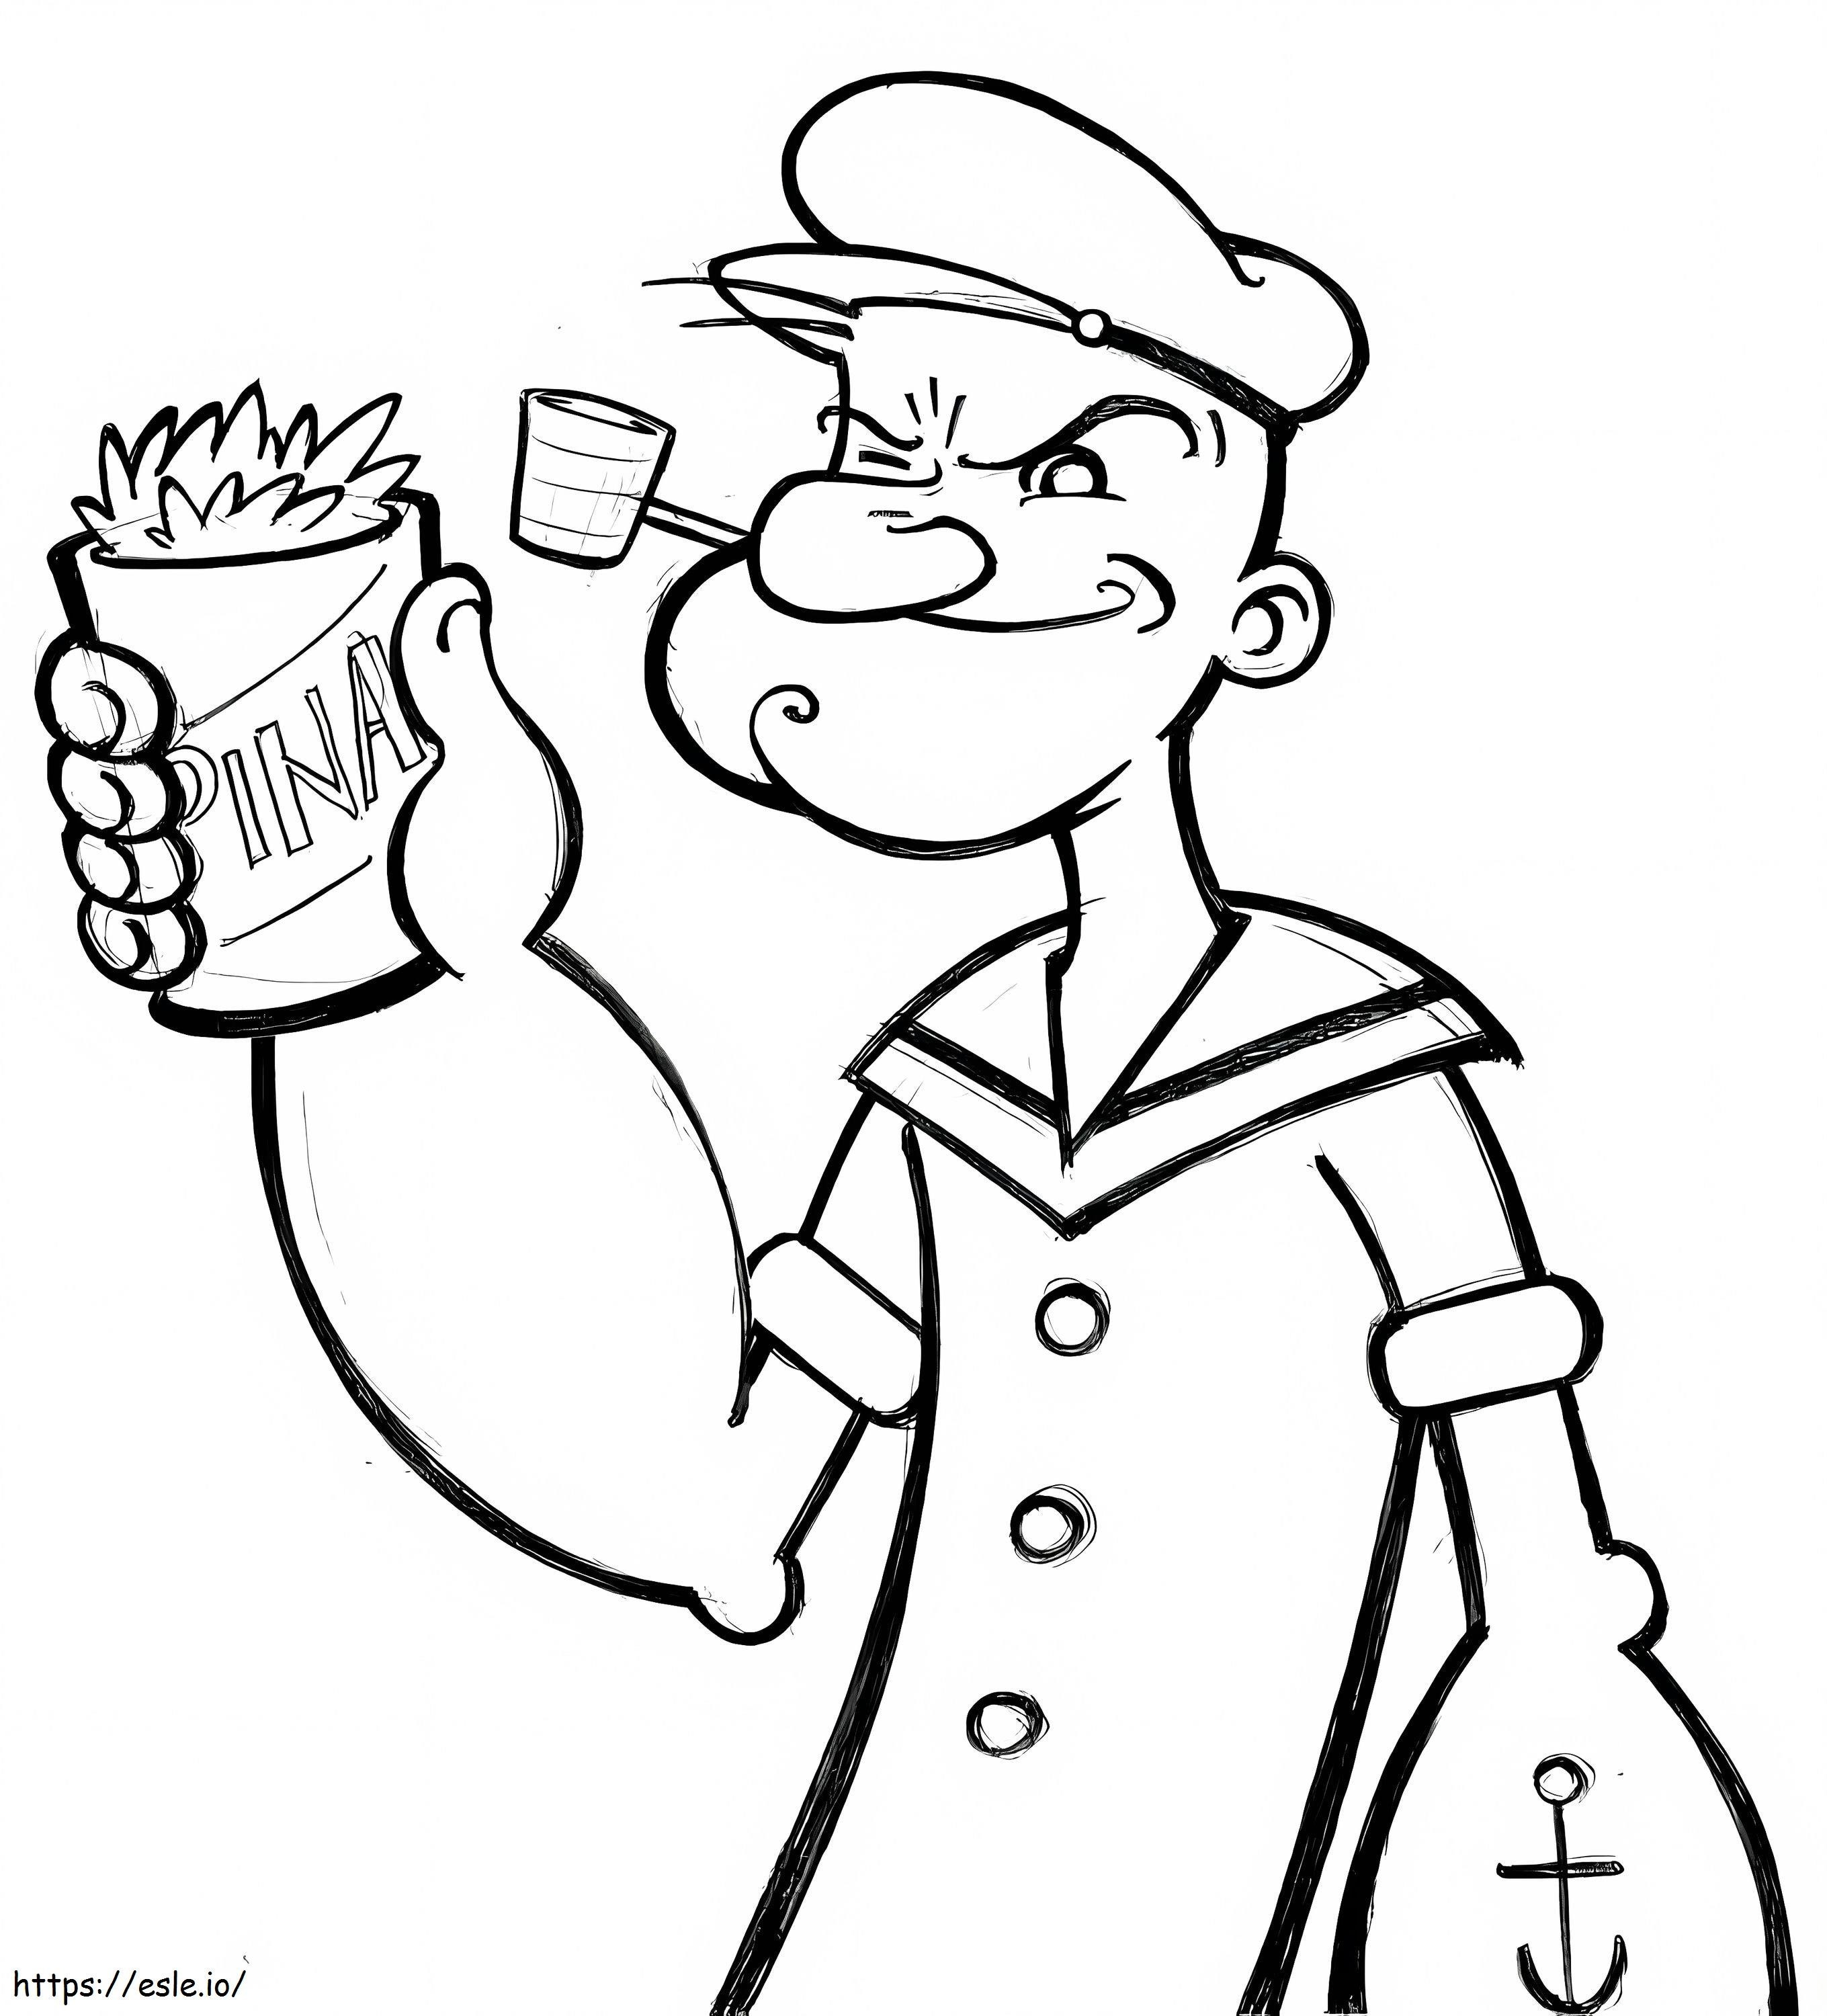 Popeye With Spinach coloring page